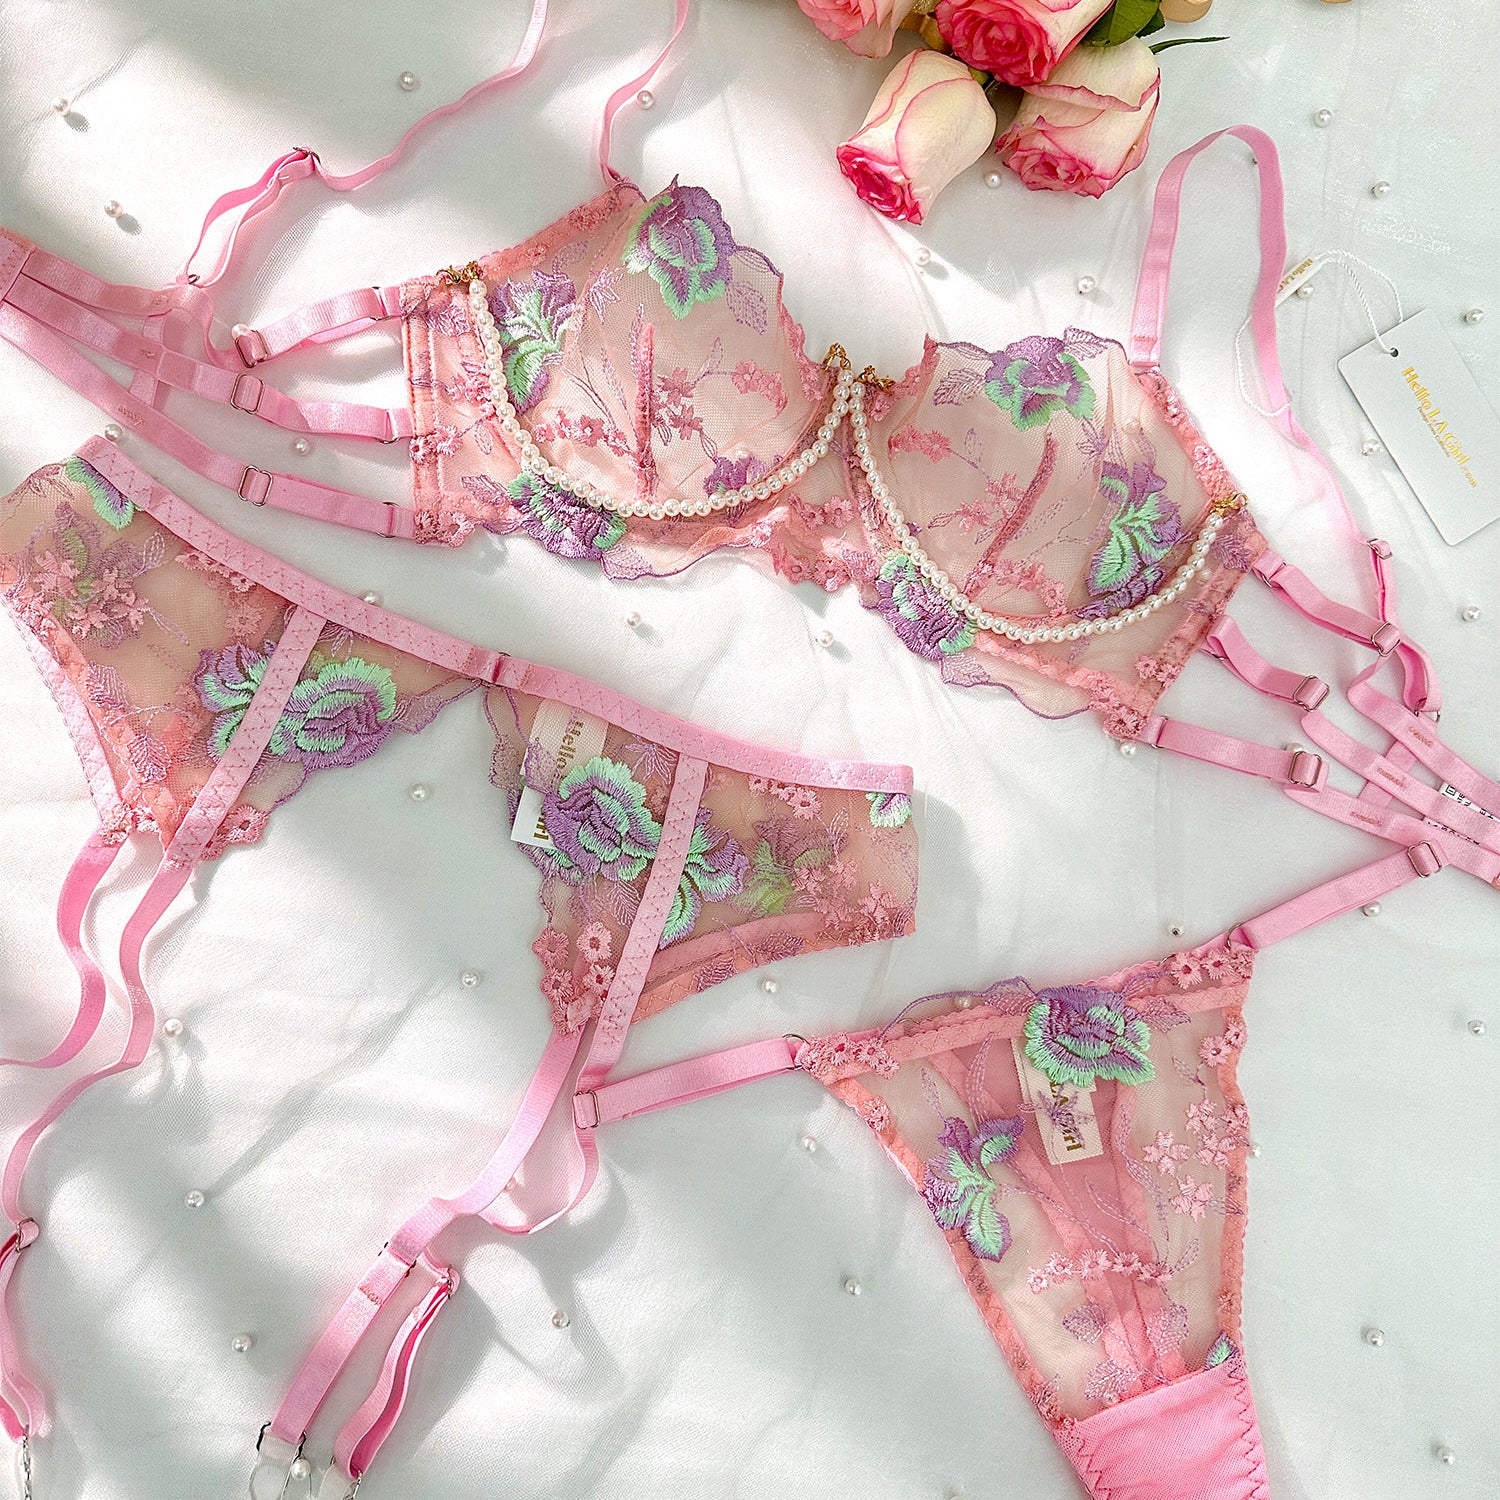 Pink Floral Embroidery Pearl Chain Lingerie Set